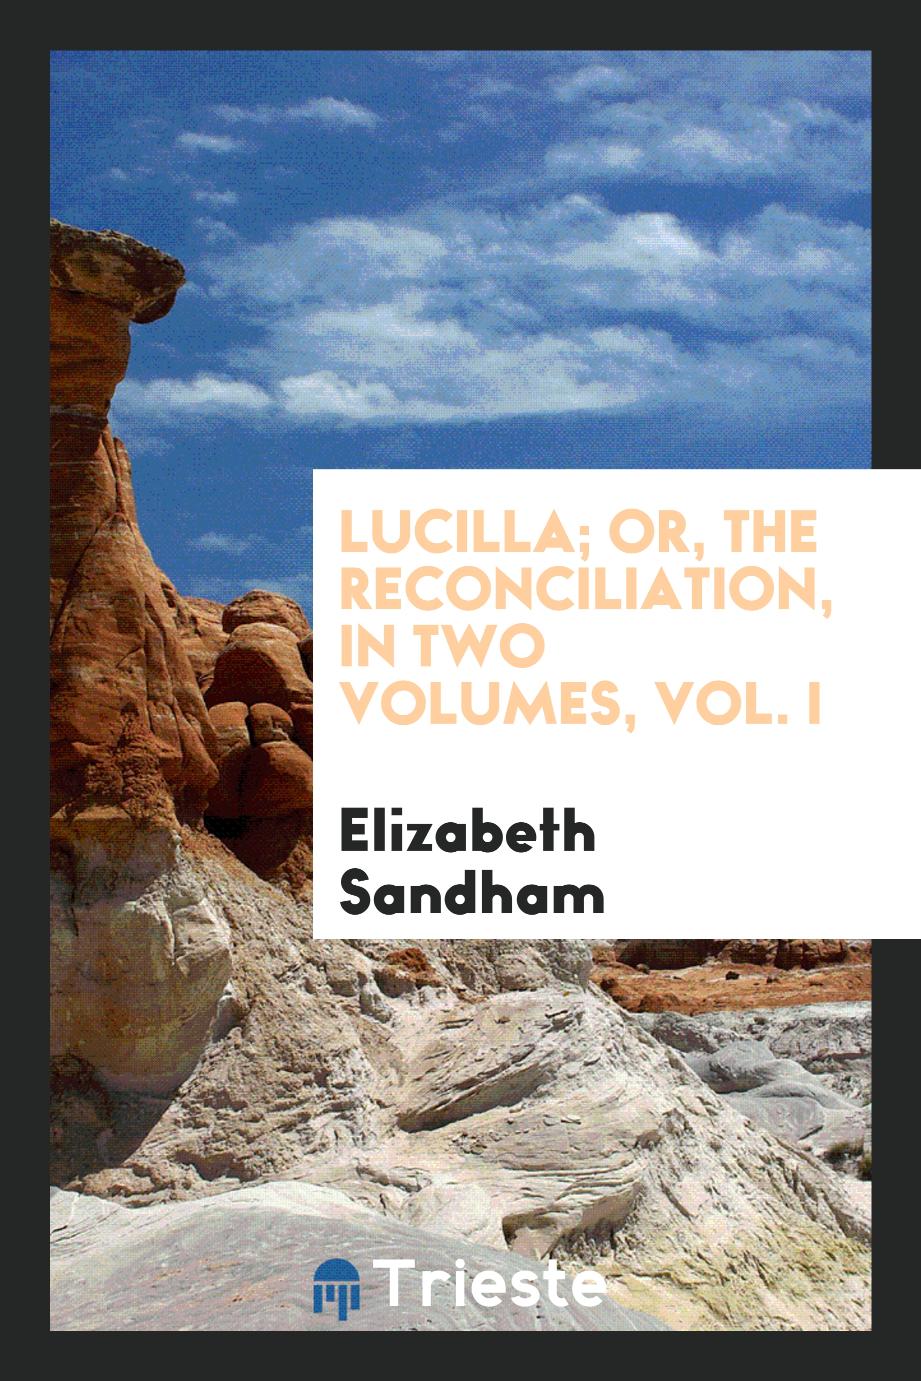 Lucilla; or, The reconciliation, in two volumes, Vol. I